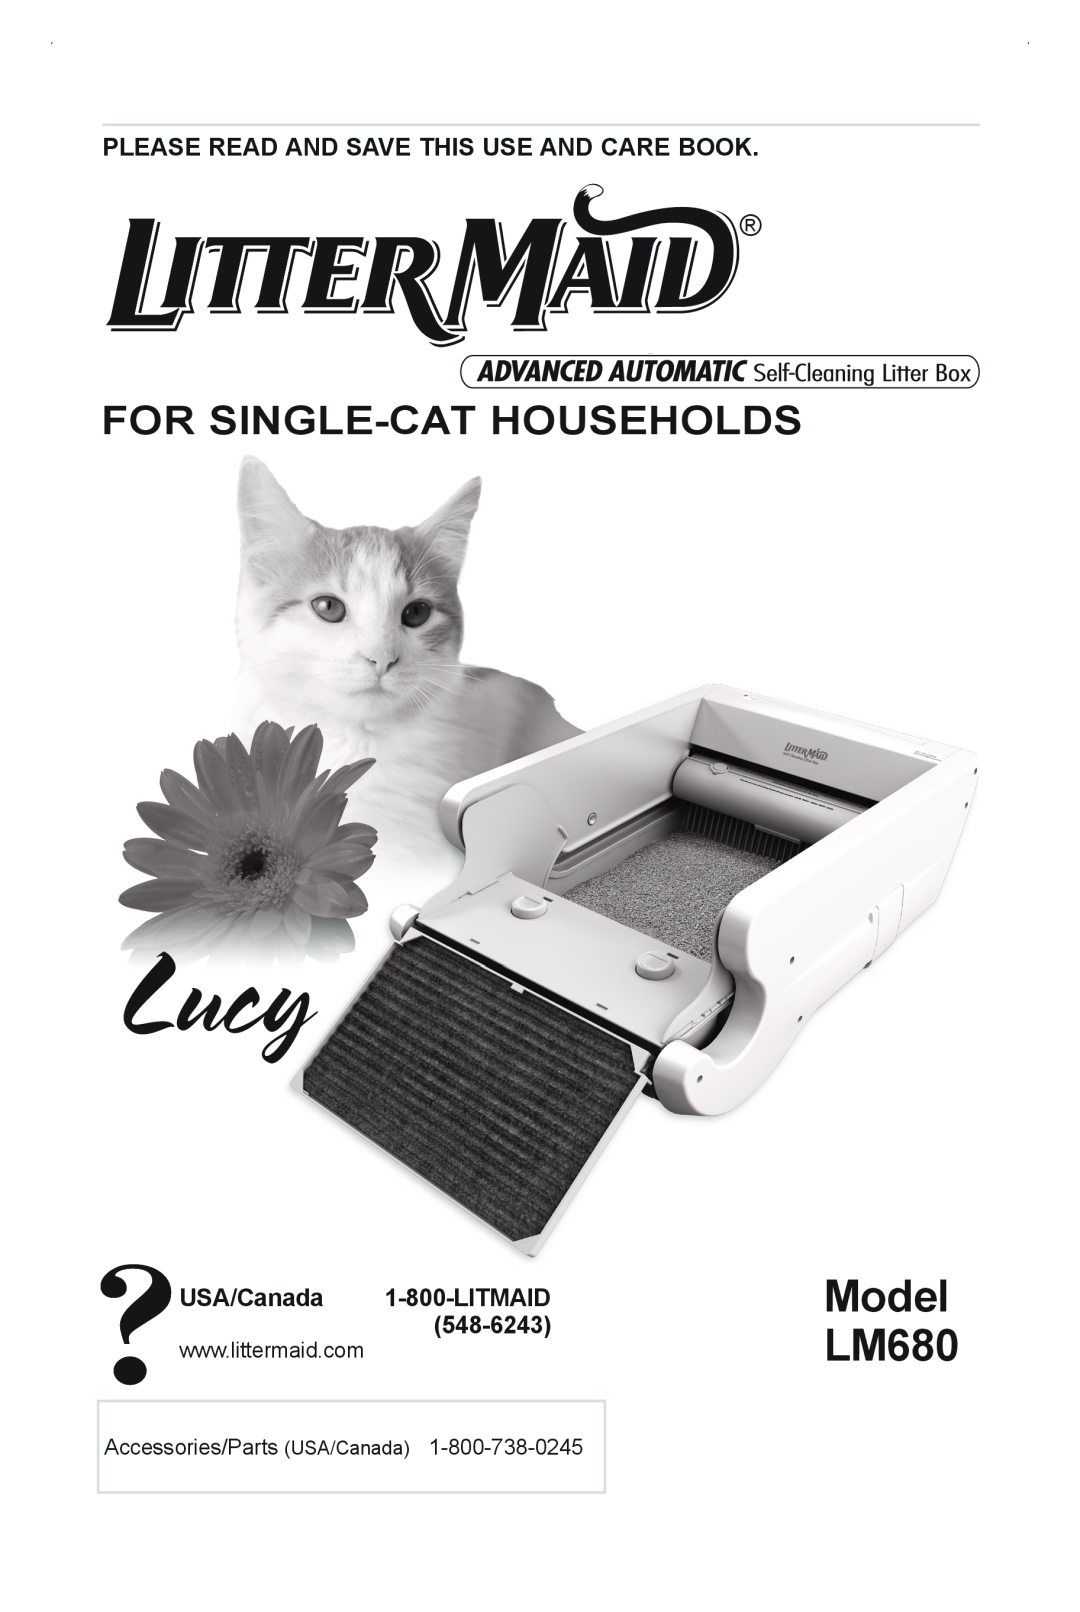 Applica manual Model LM680, Lucy, For Single-Cathouseholds, Please Read And Save This Use And Care Book 